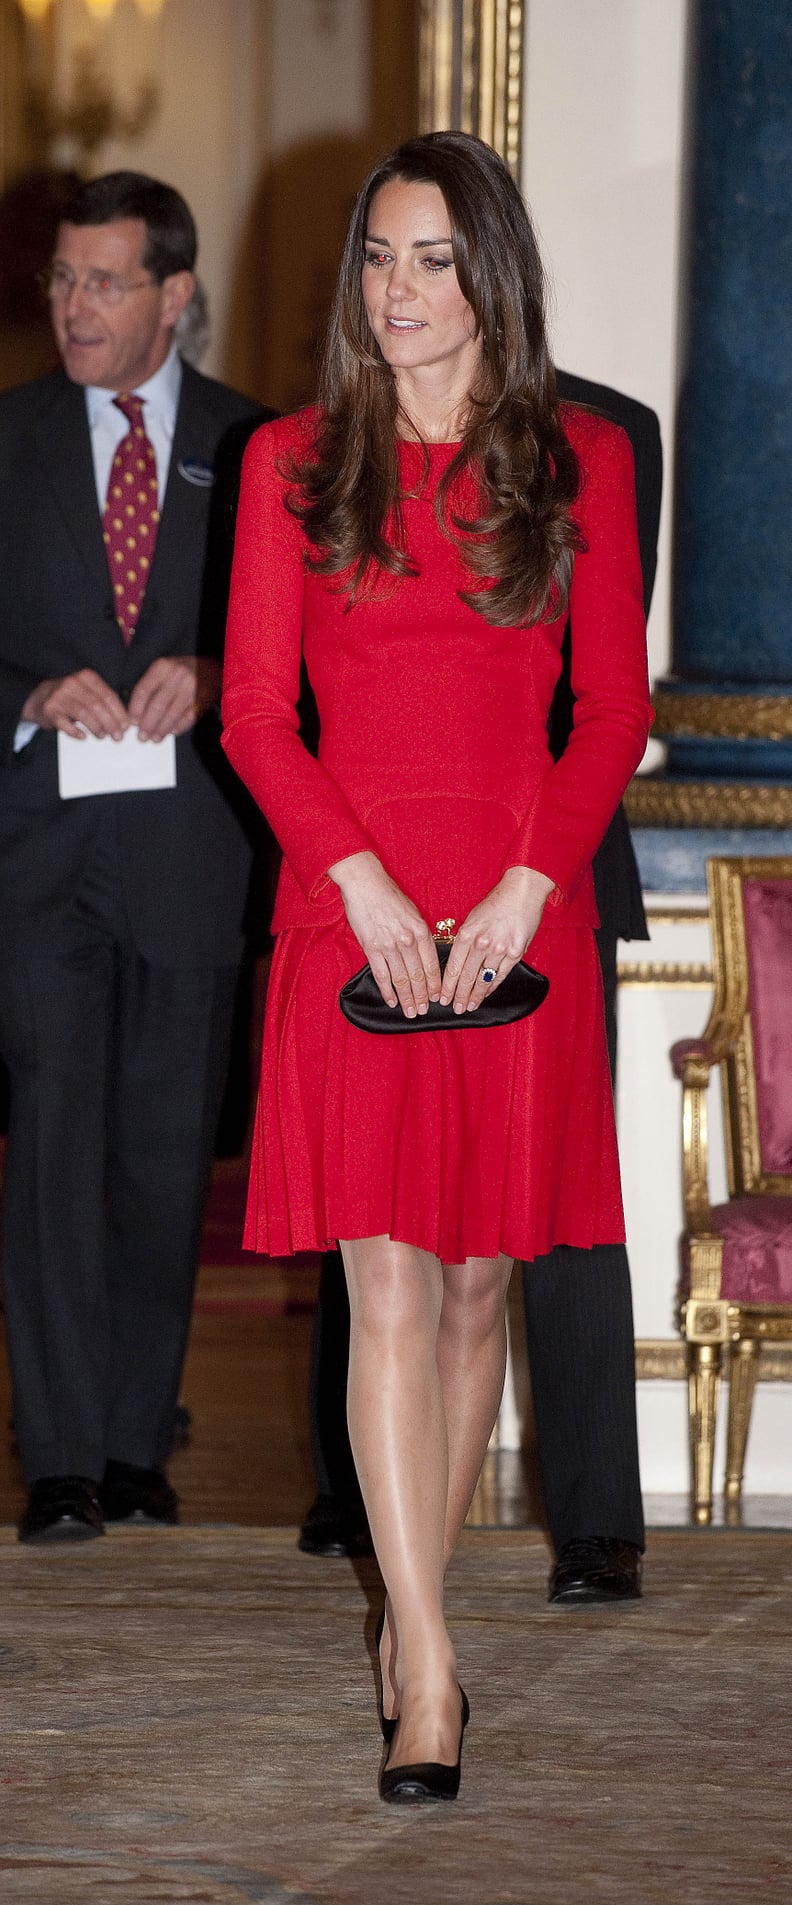 Kate Wearing the Red Dress in 2014